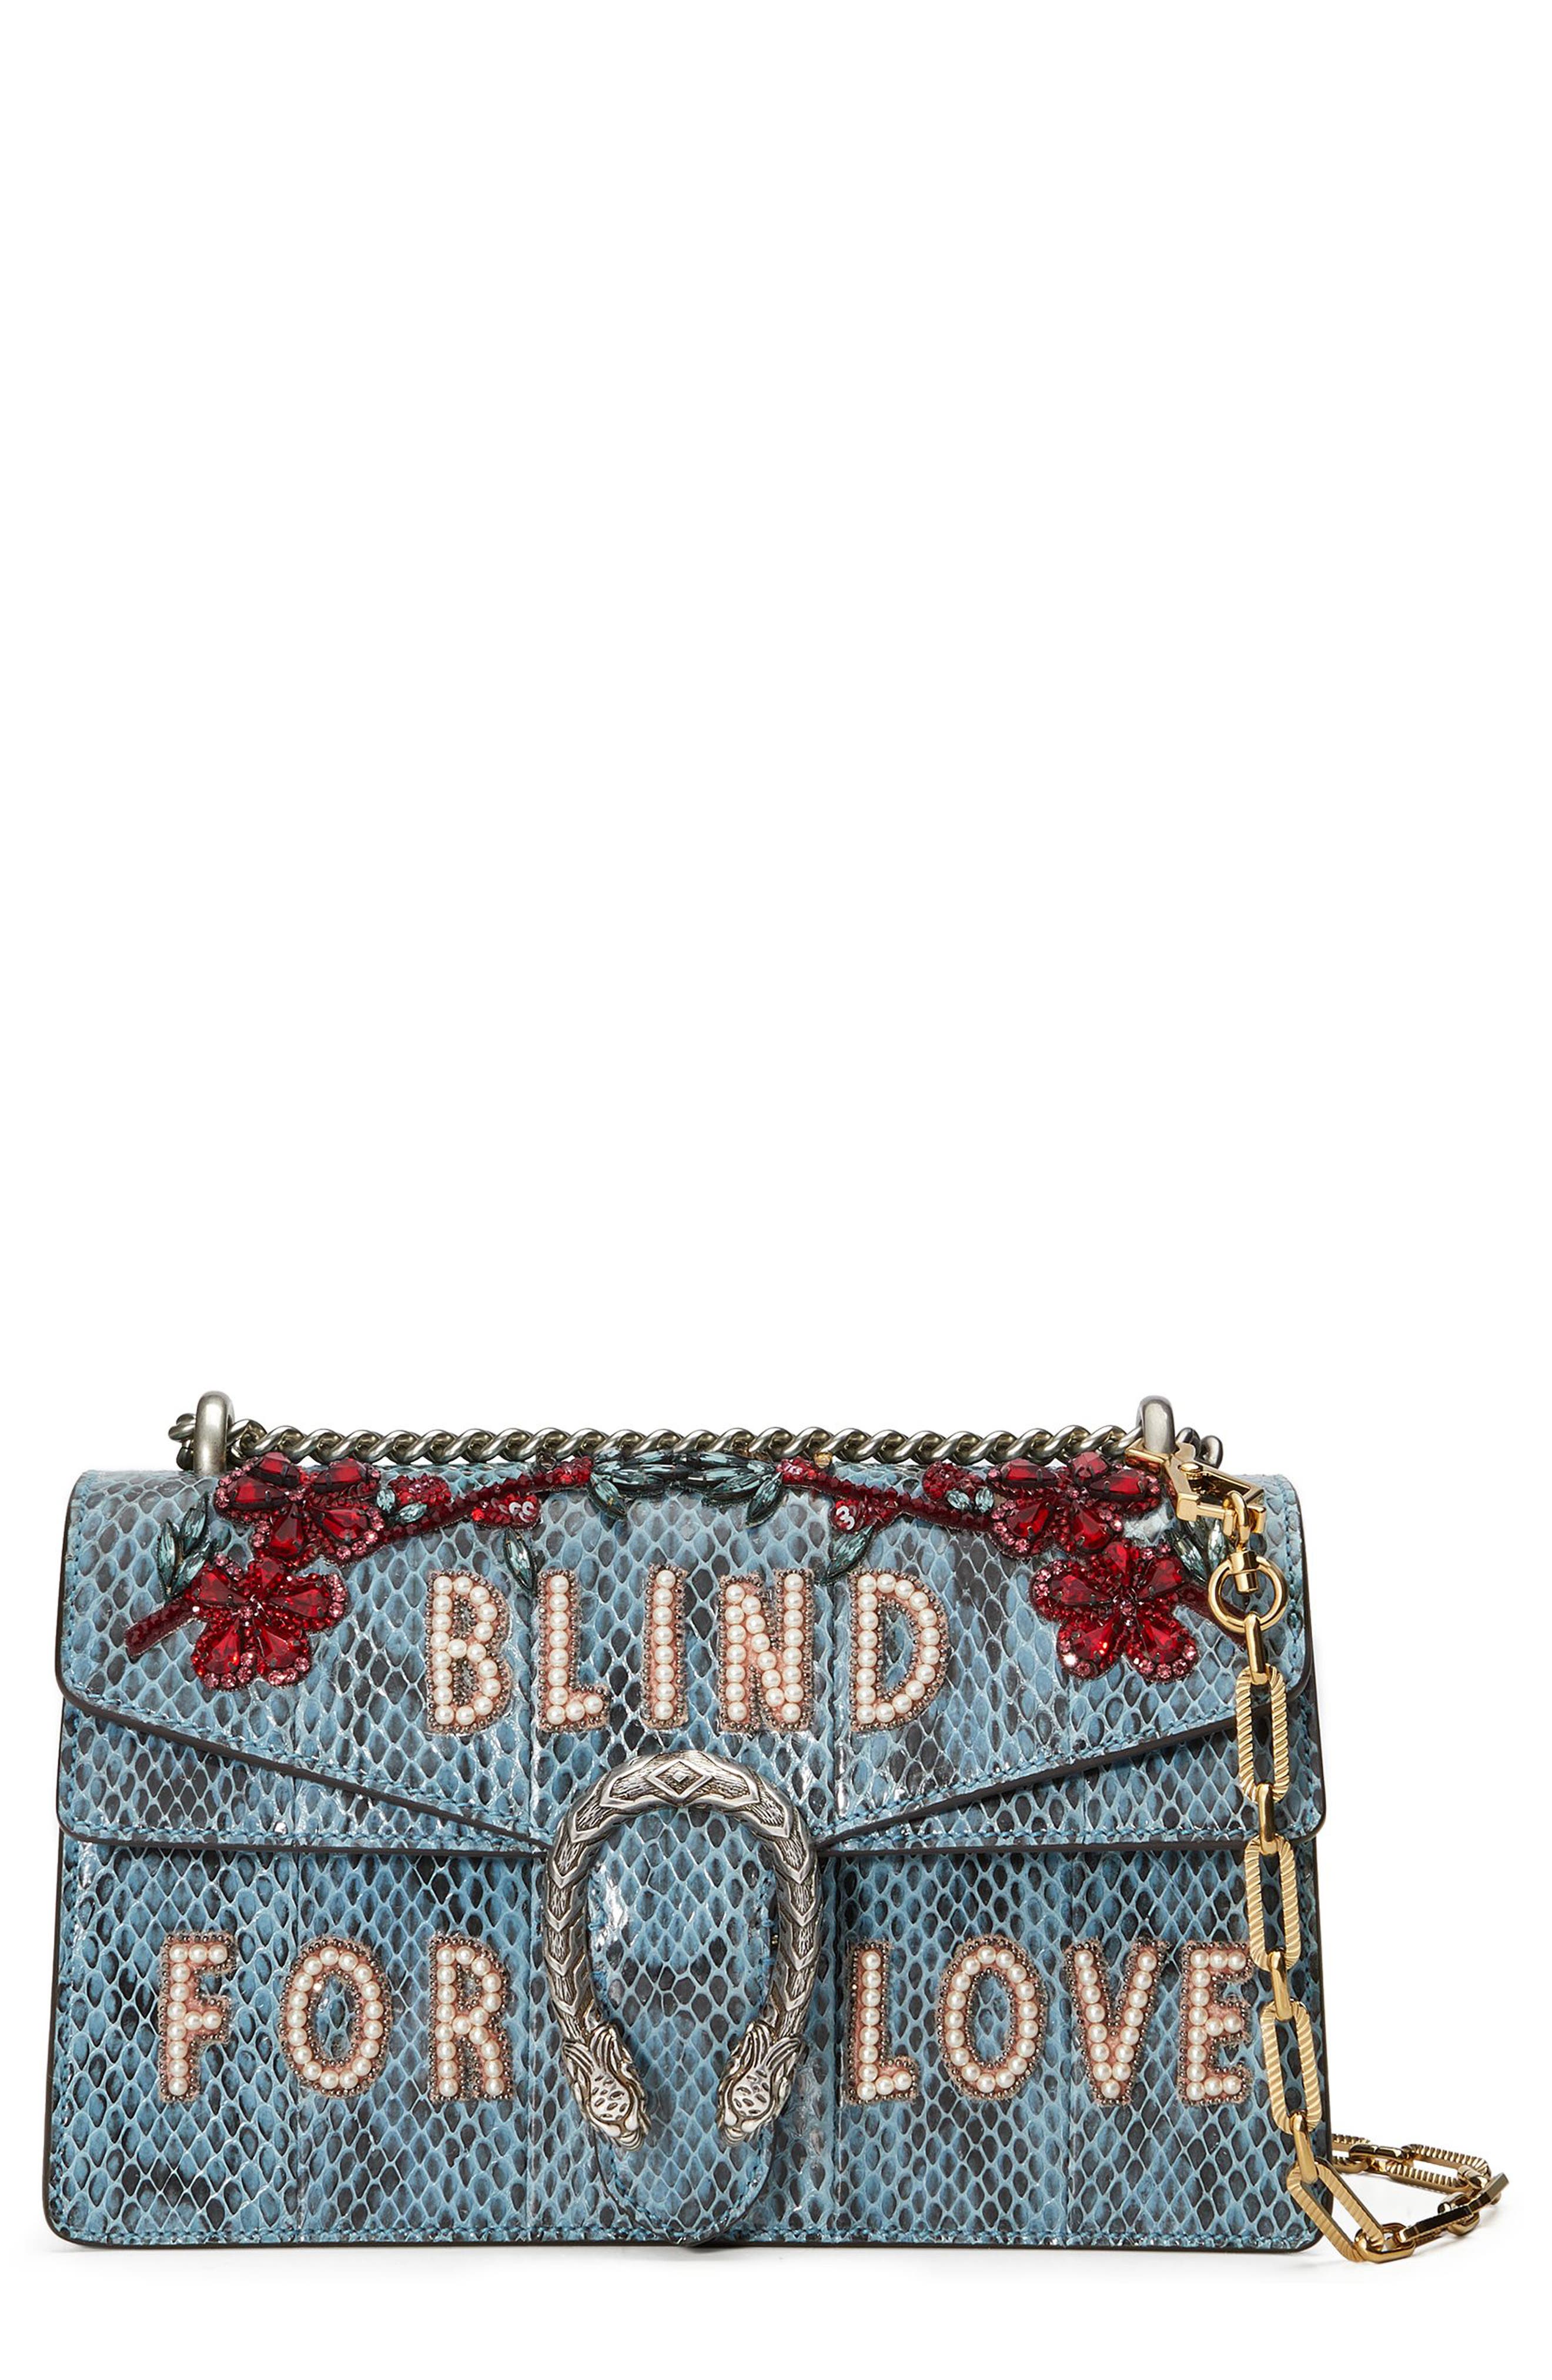 blind for love purse